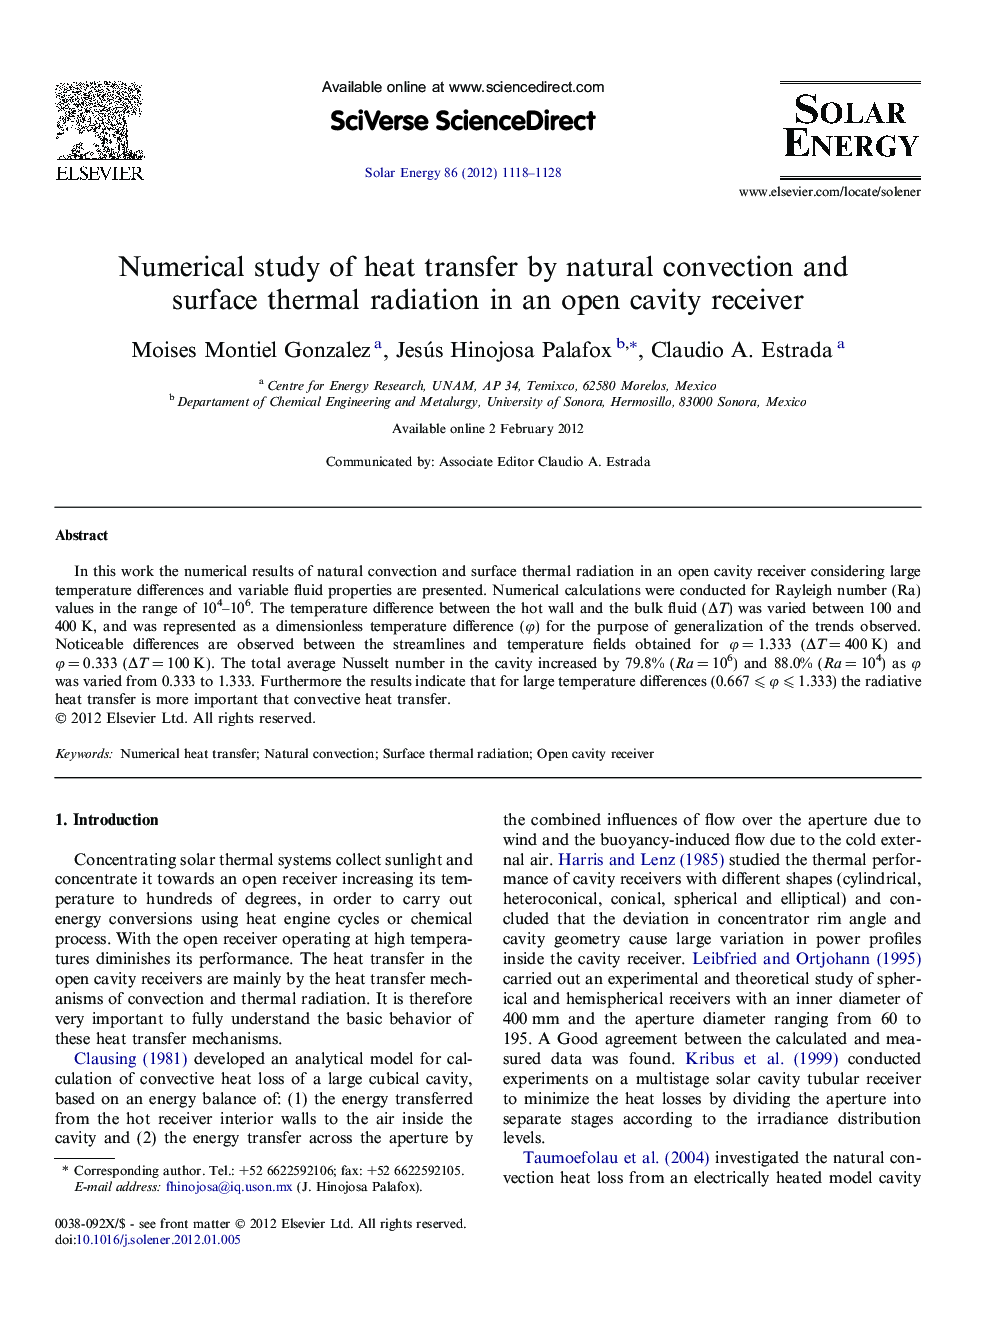 Numerical study of heat transfer by natural convection and surface thermal radiation in an open cavity receiver